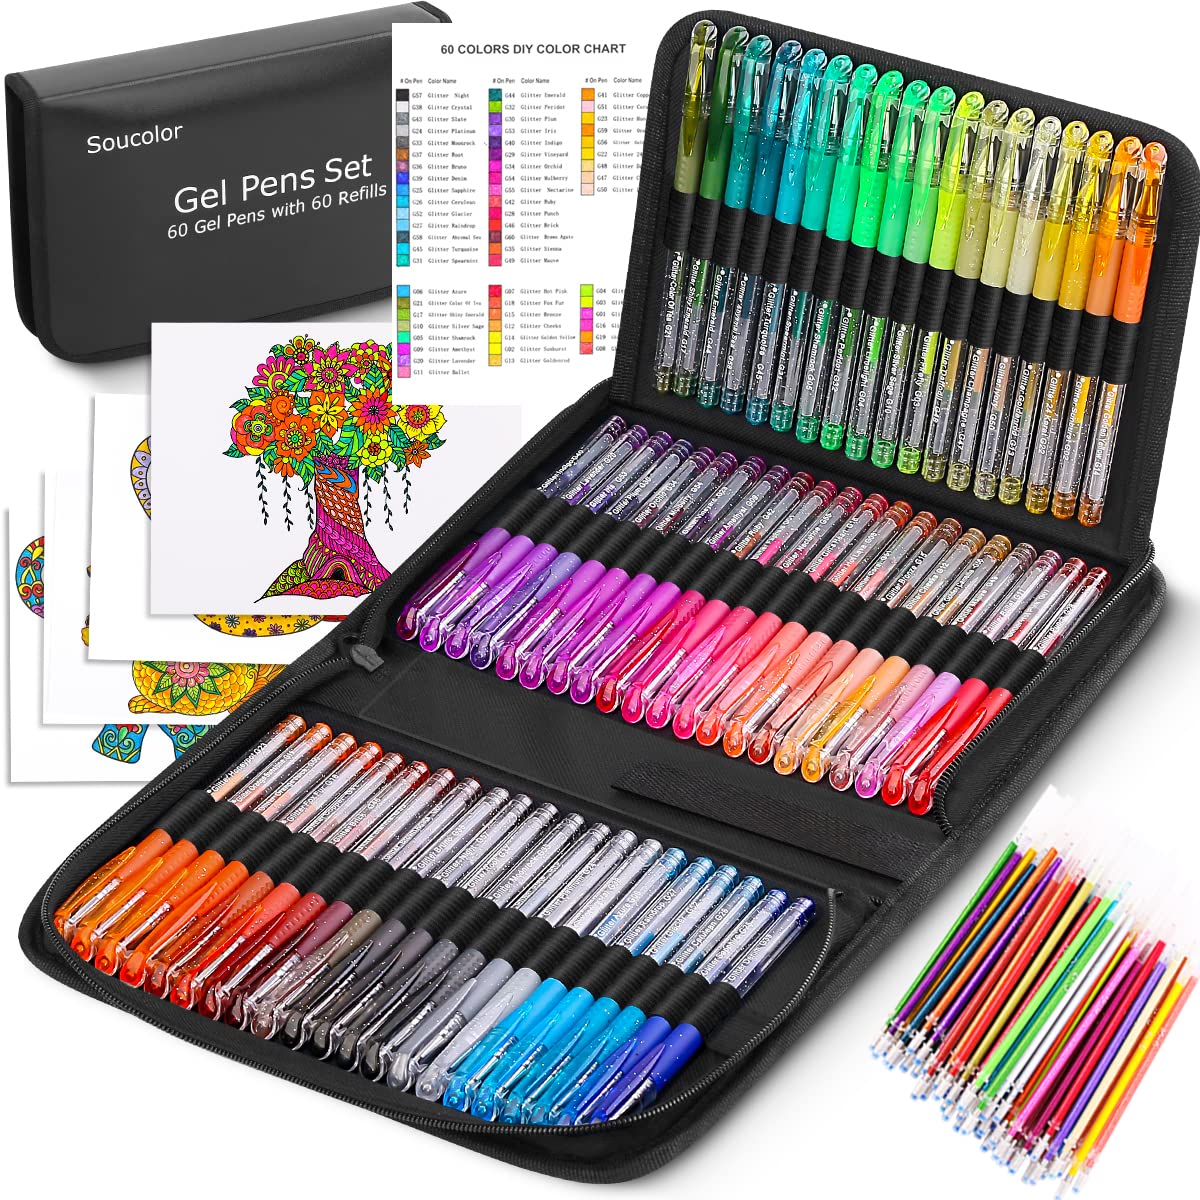  TANMIT Glitter Gel Pens, Glitter Pen with Case for